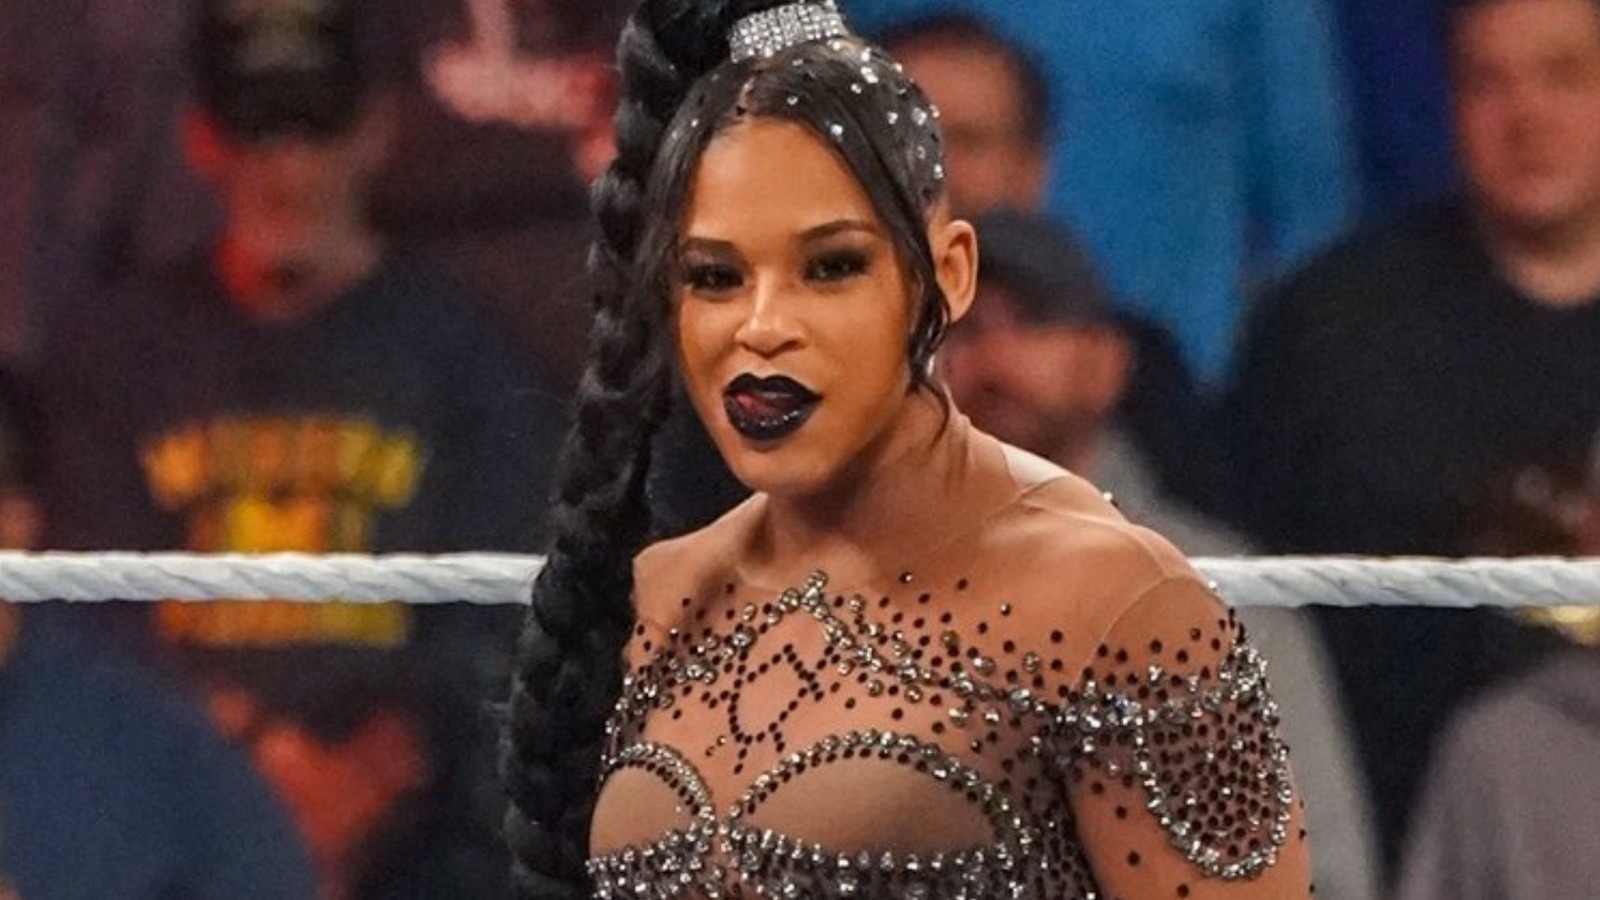 Otis Explains Why The 'Sky Is The Limit' For Bianca Belair In WWE